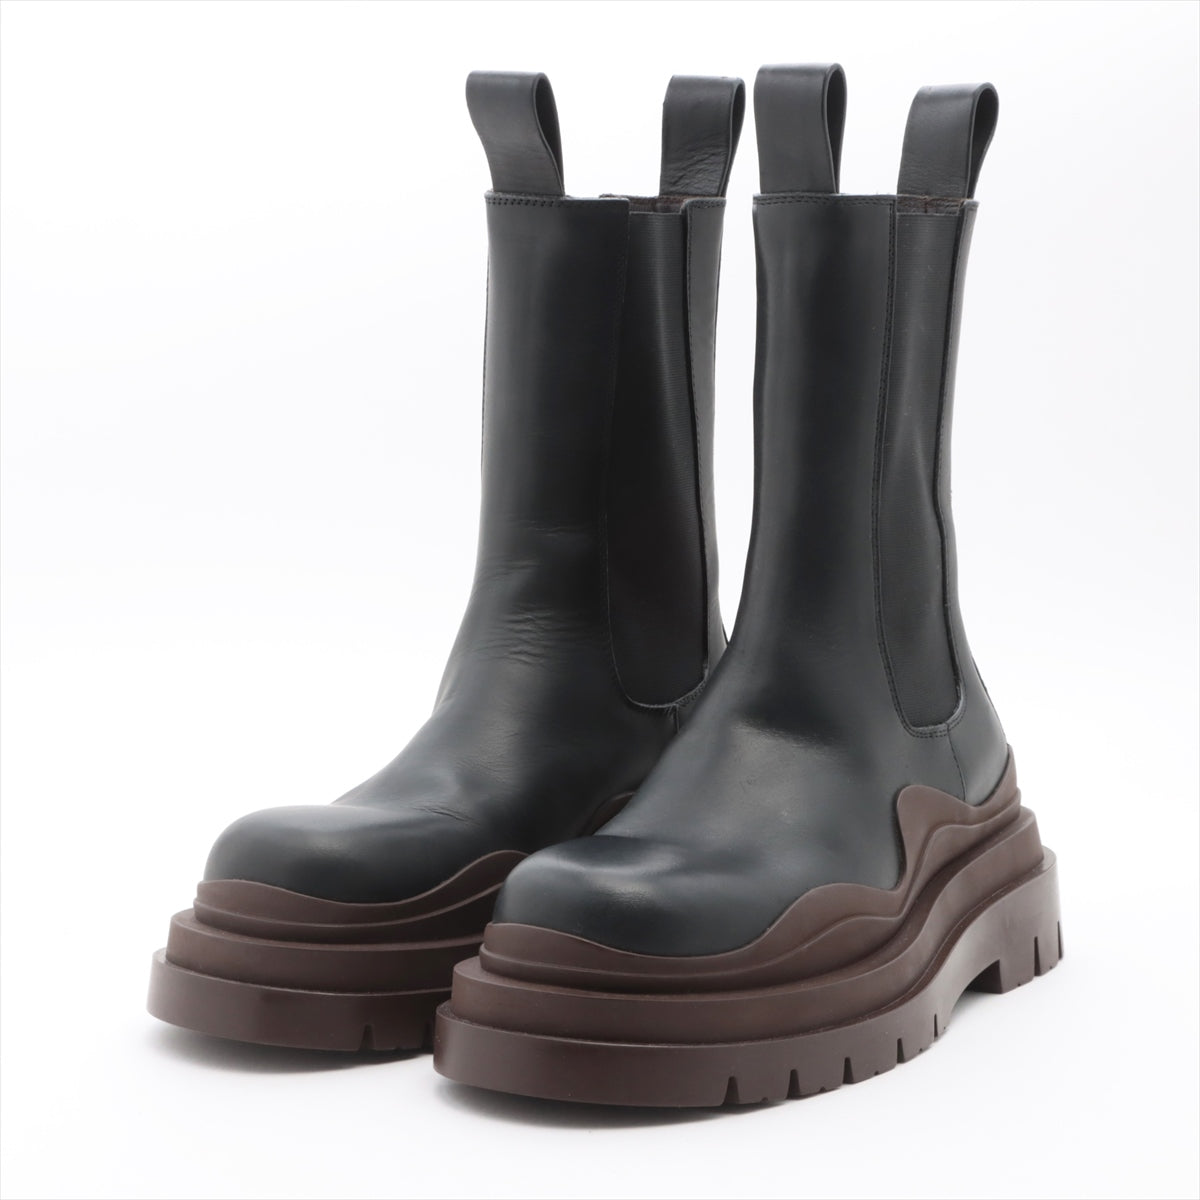 Bottega Veneta Leather Side Gore Boots 39 Men's Black tyres chelsea boots box There is a bag